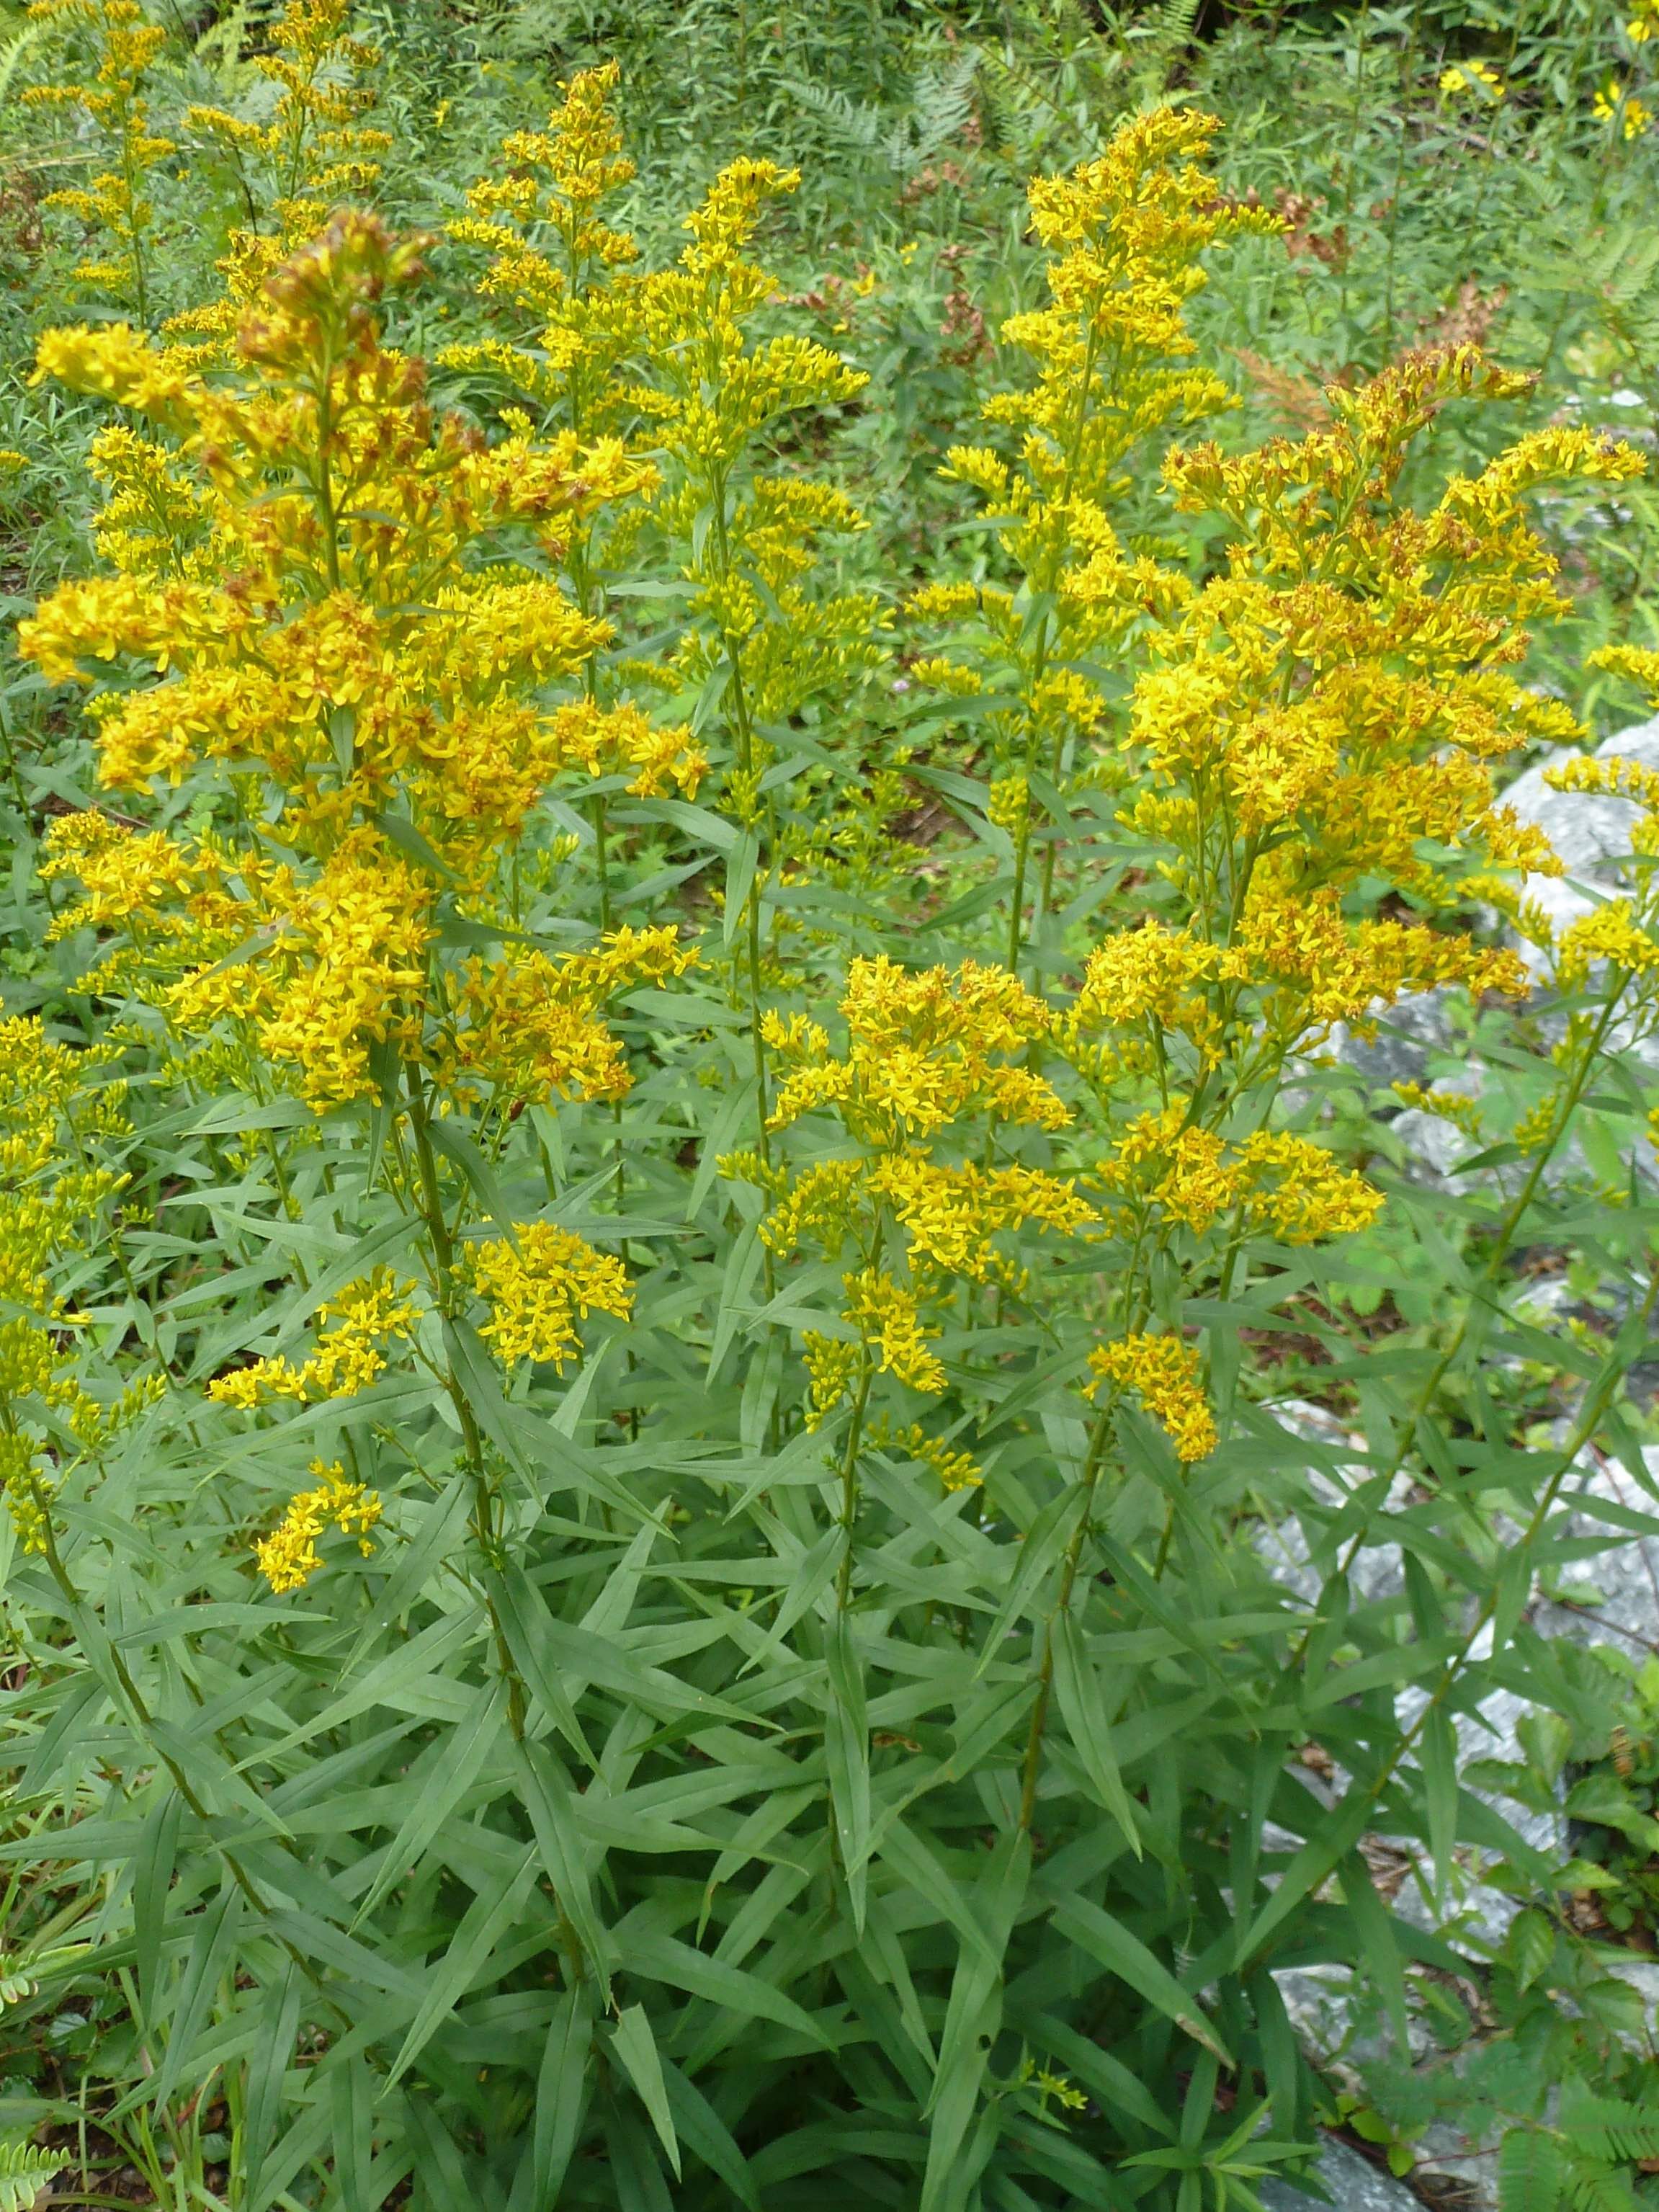 The Scientific Name is Solidago odora. You will likely hear them called Licorice Goldendrod, Anise Goldenrod, Sweet Goldenrod. This picture shows the The crushed leaves have an anise scent. of Solidago odora